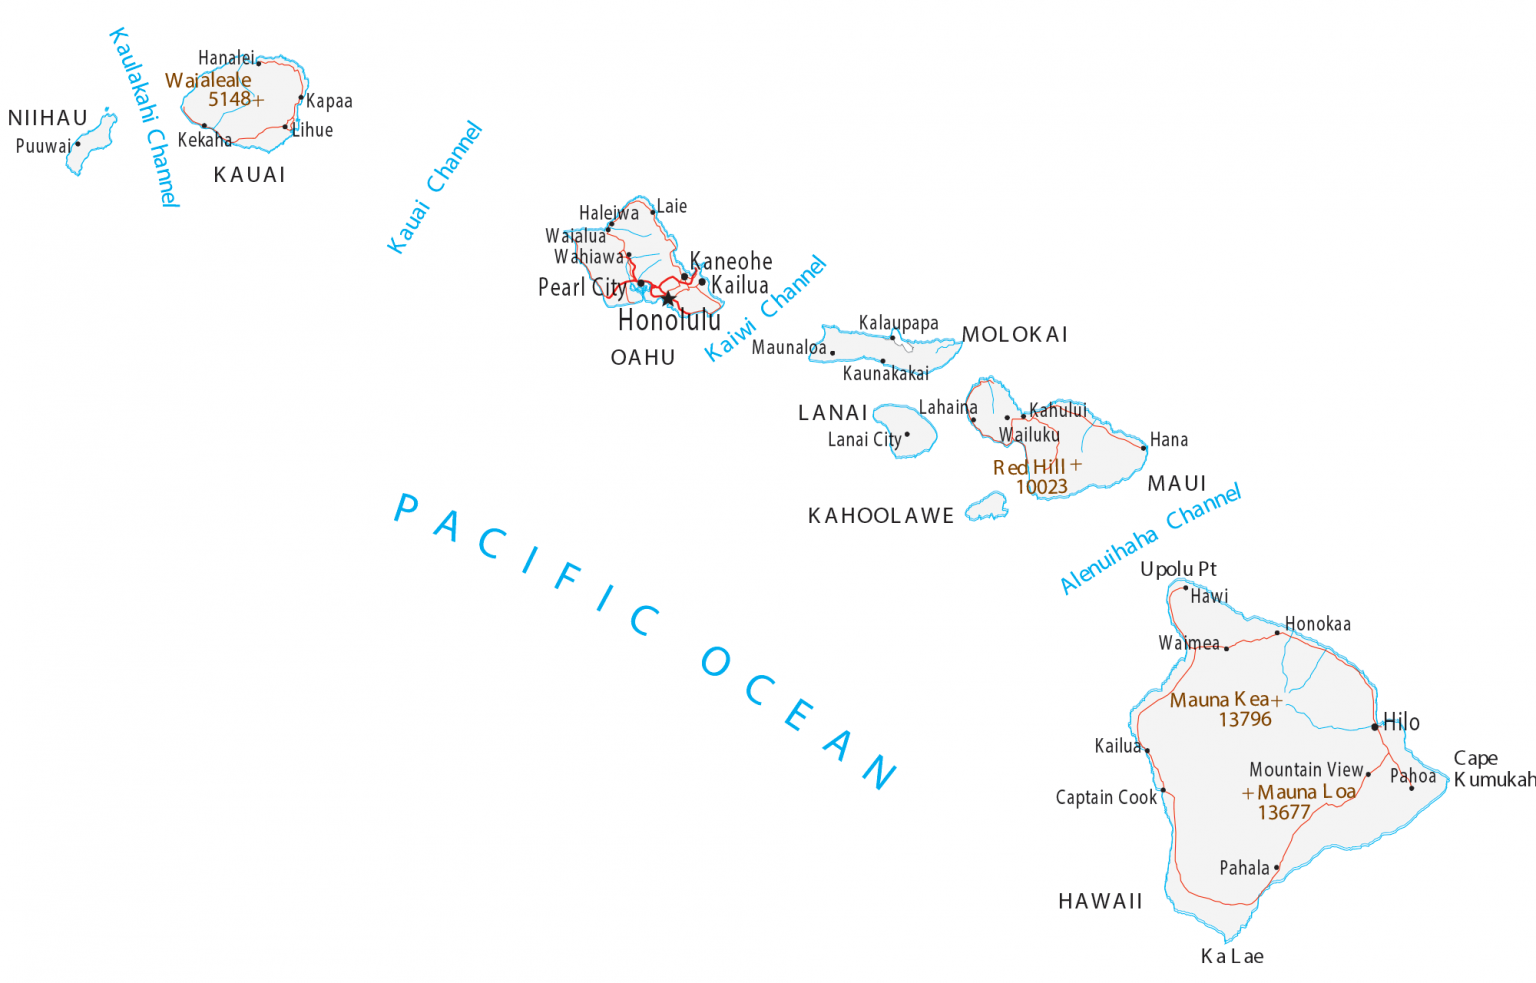 Map of Hawaii - Islands and Cities - GIS Geography